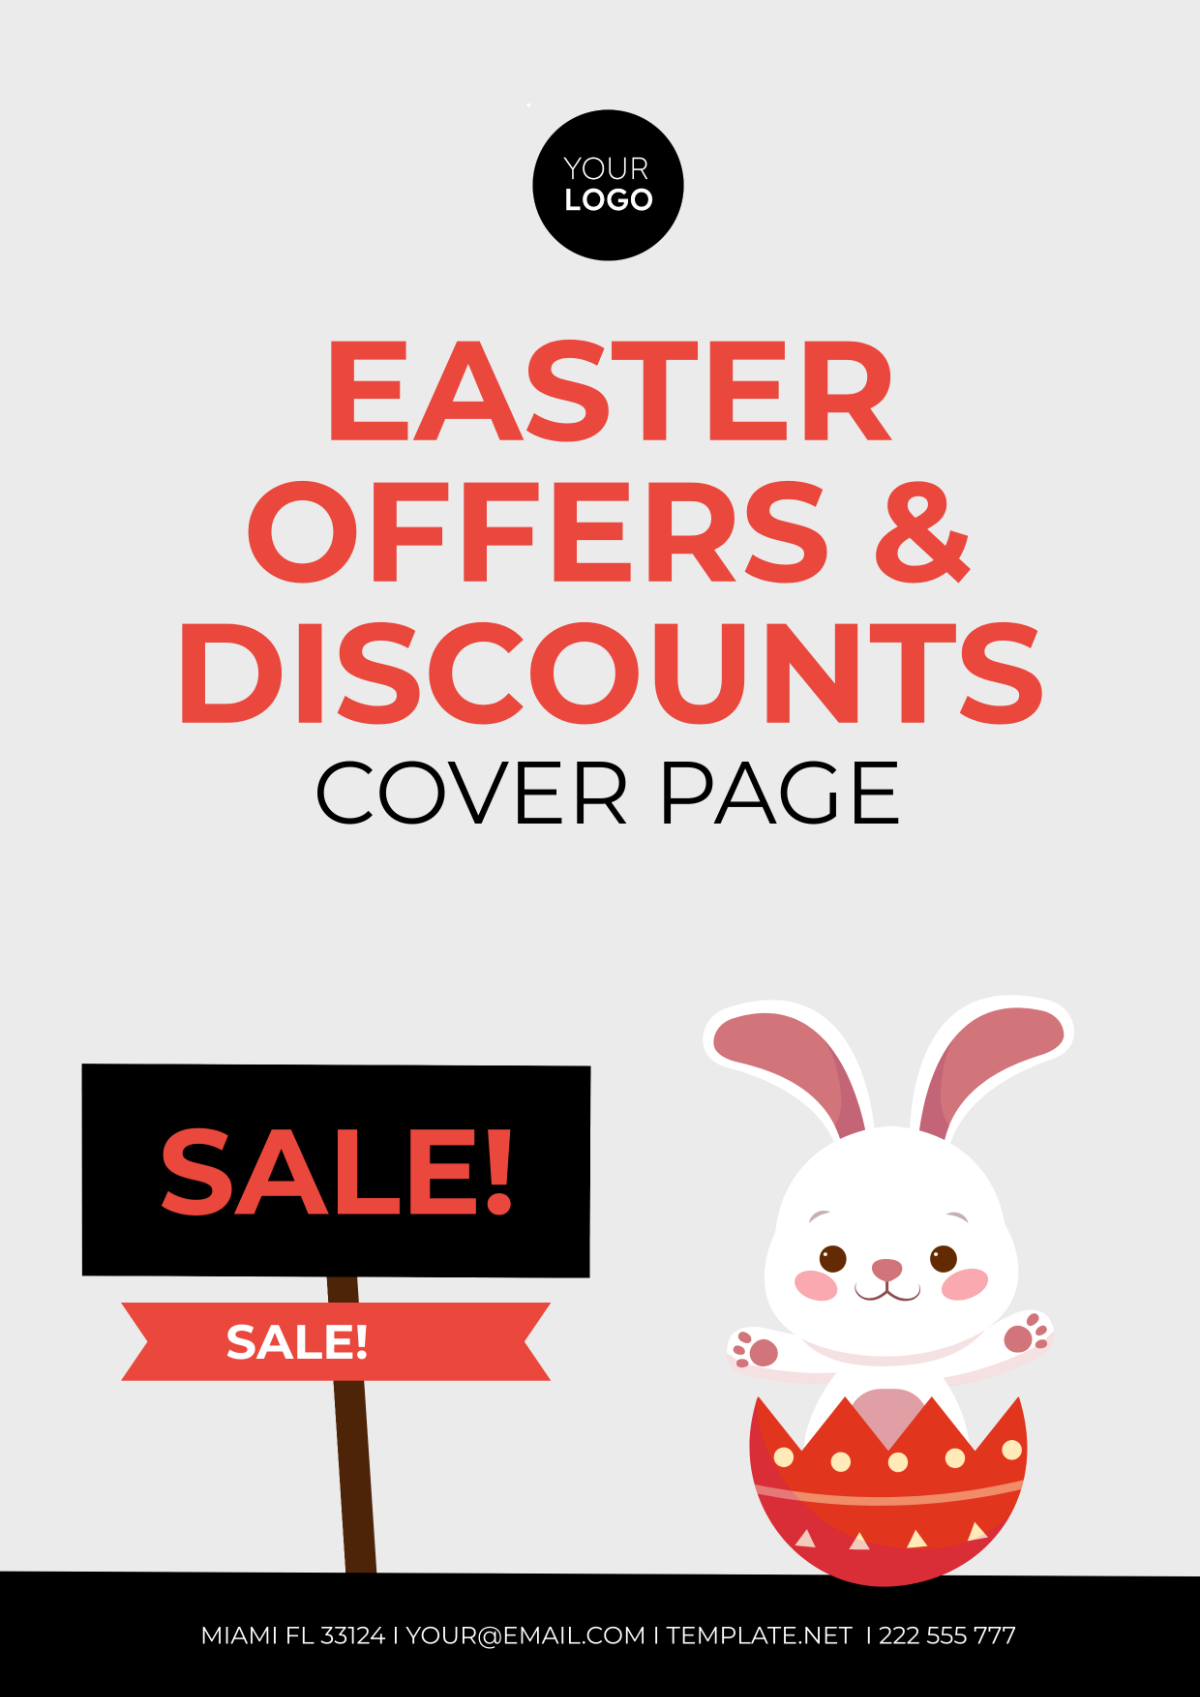 Easter Offers & Discounts Cover Page